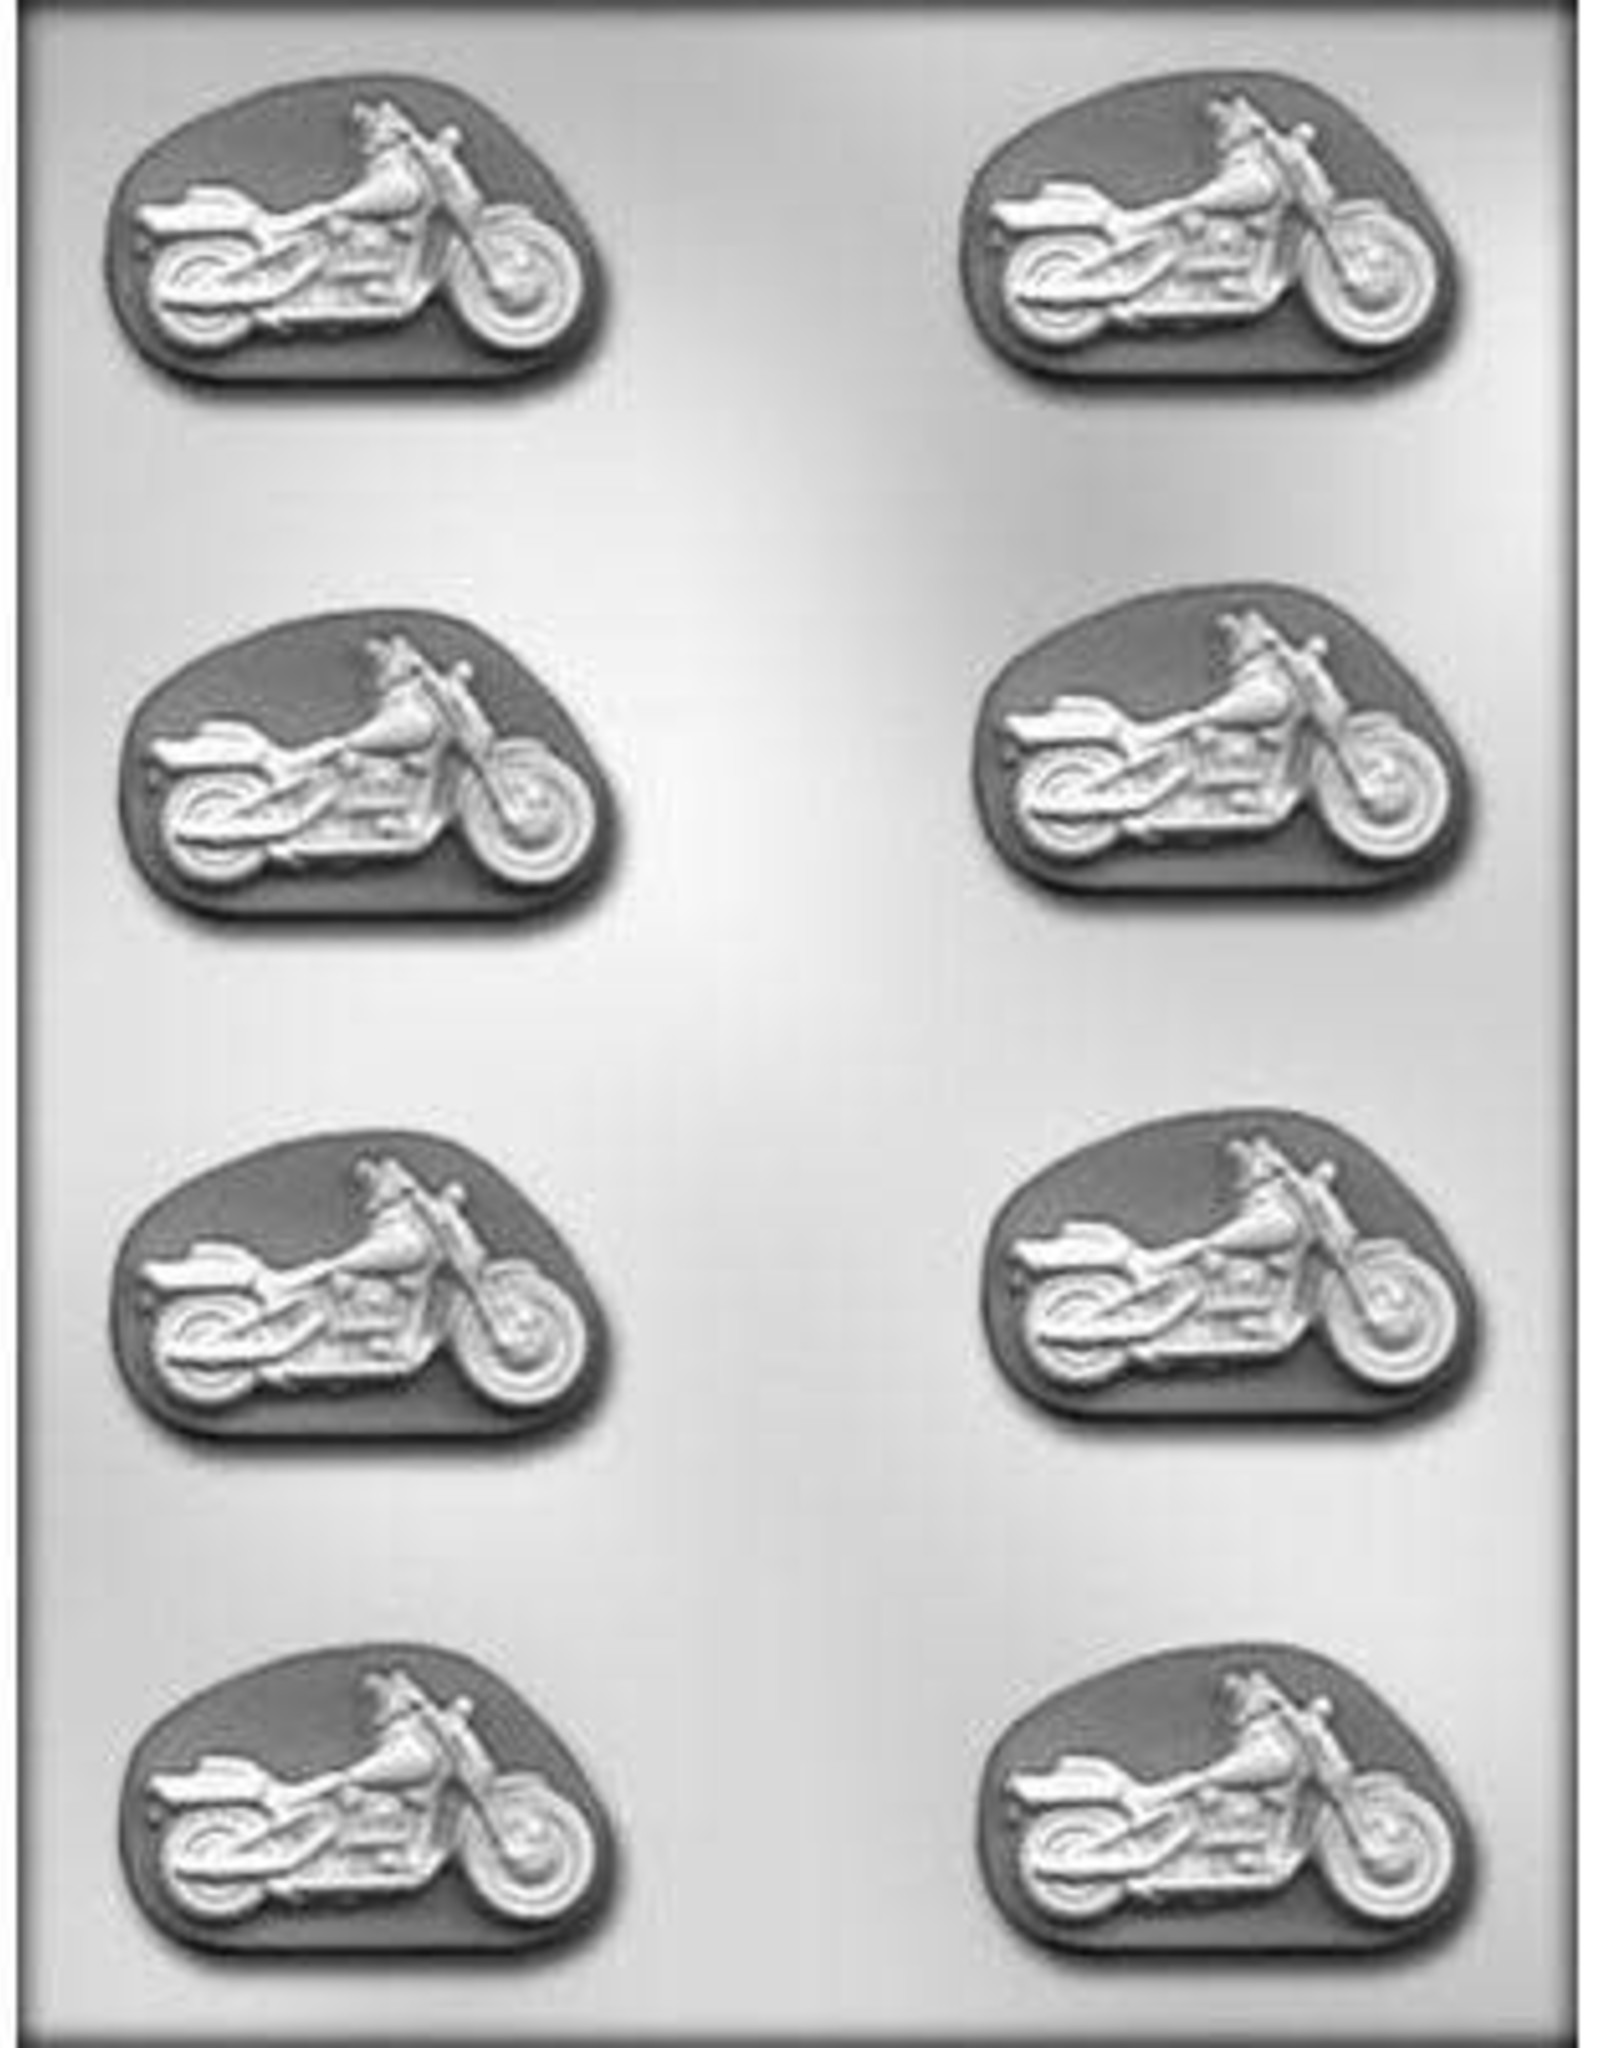 Motorcyle Mint Chocolate Mold (2")